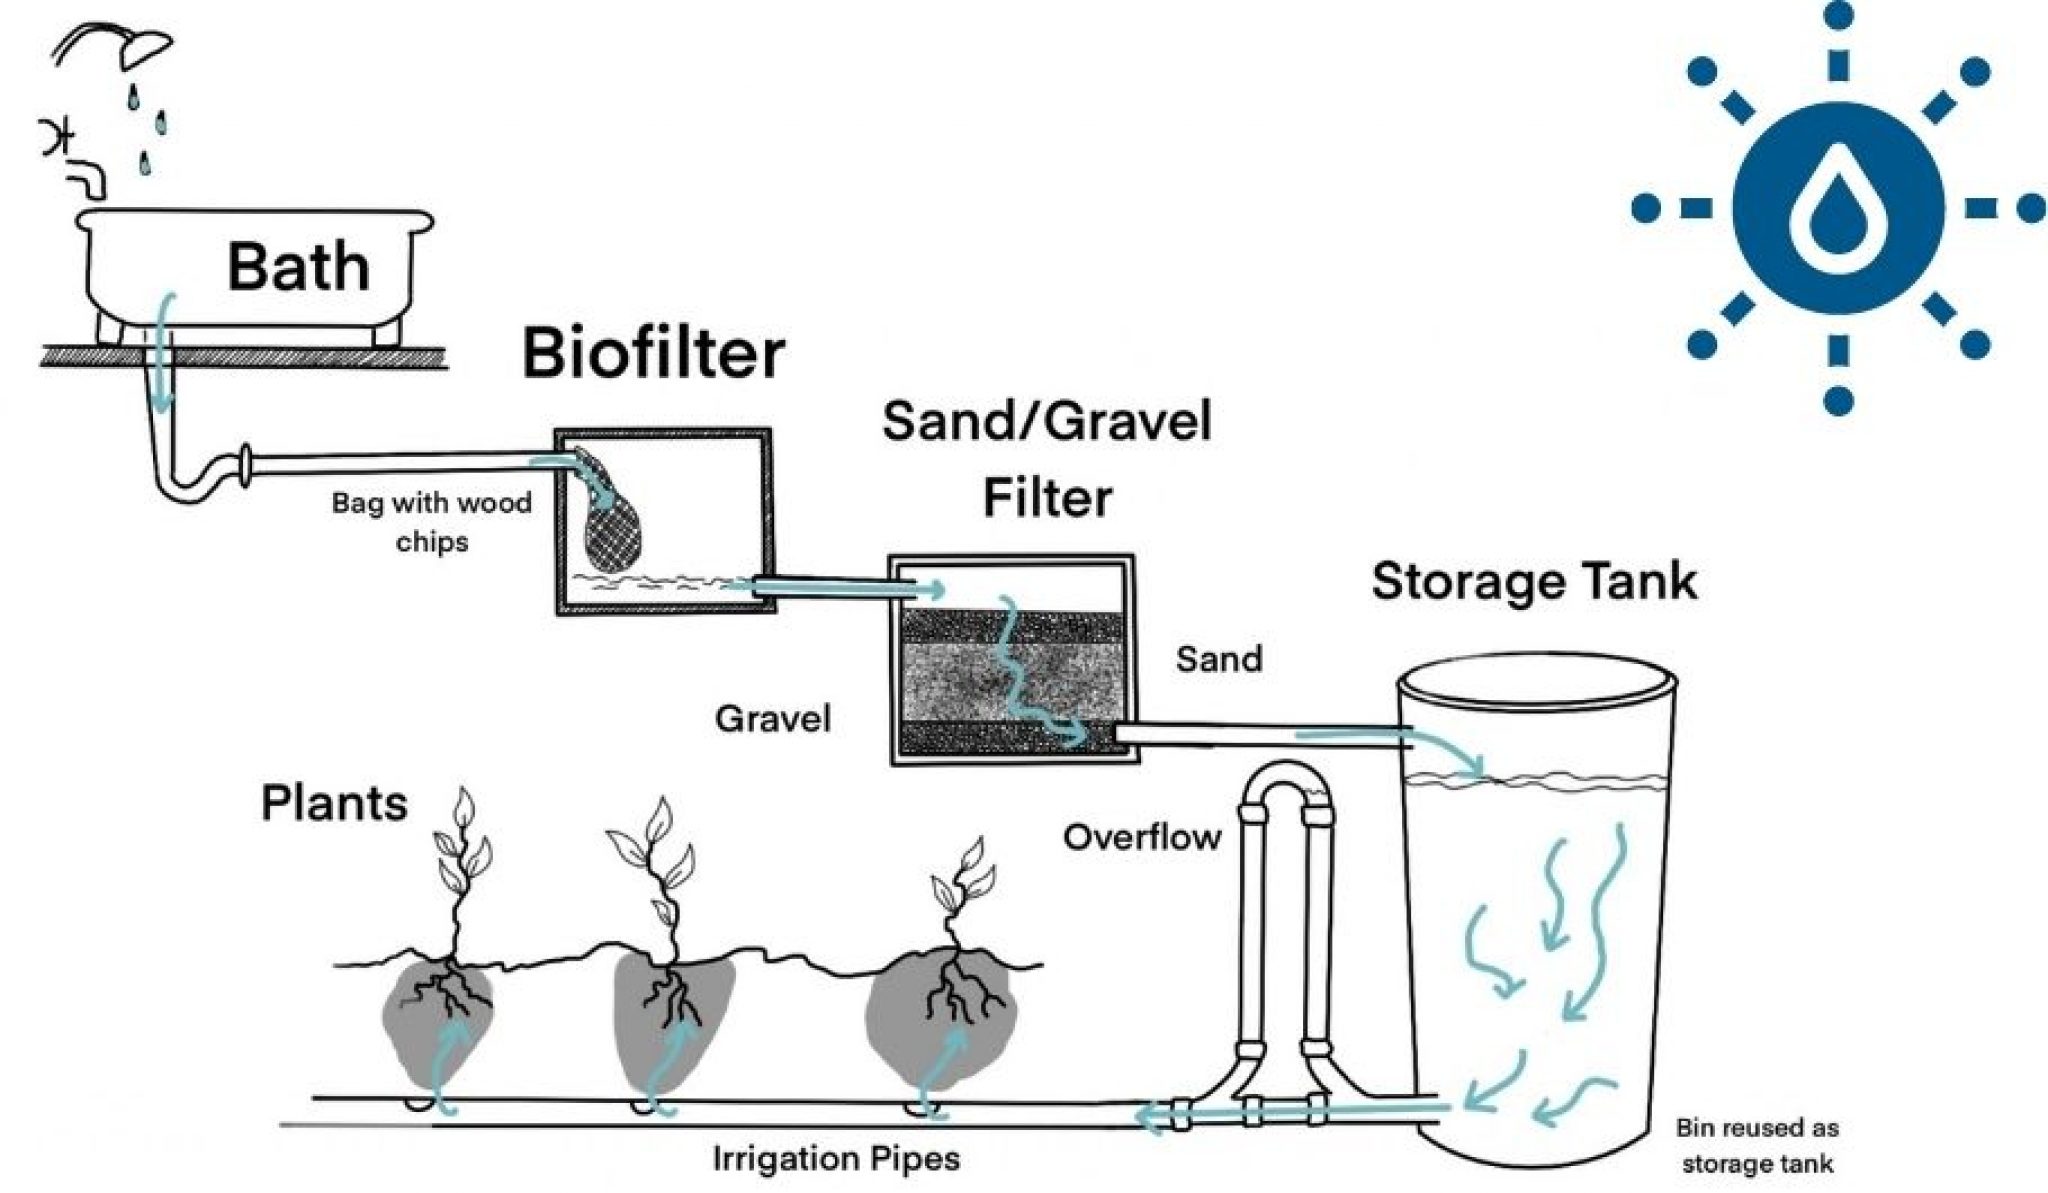 The above diagram shows how an example of a greywater system.